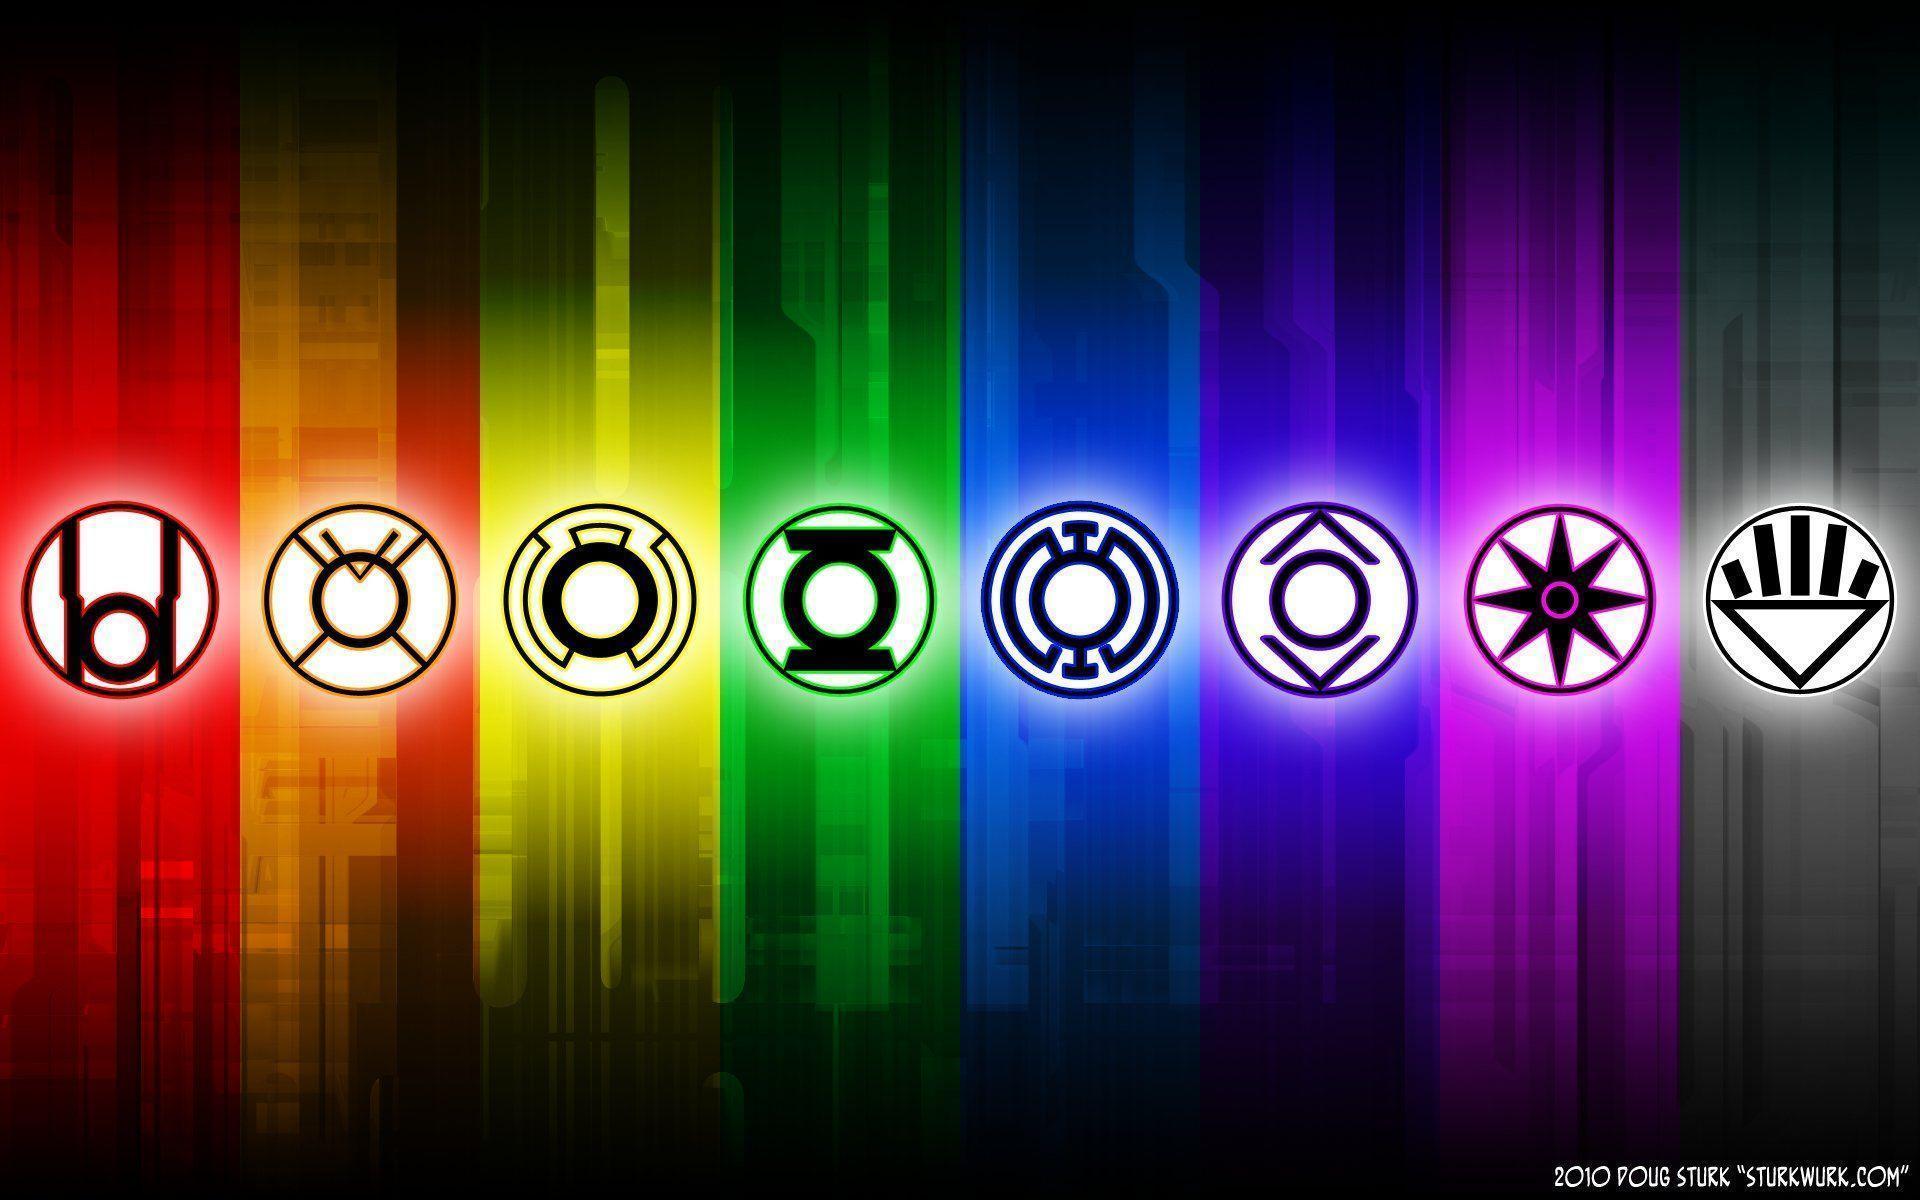 Green Lantern HD Wallpaper and Background Image